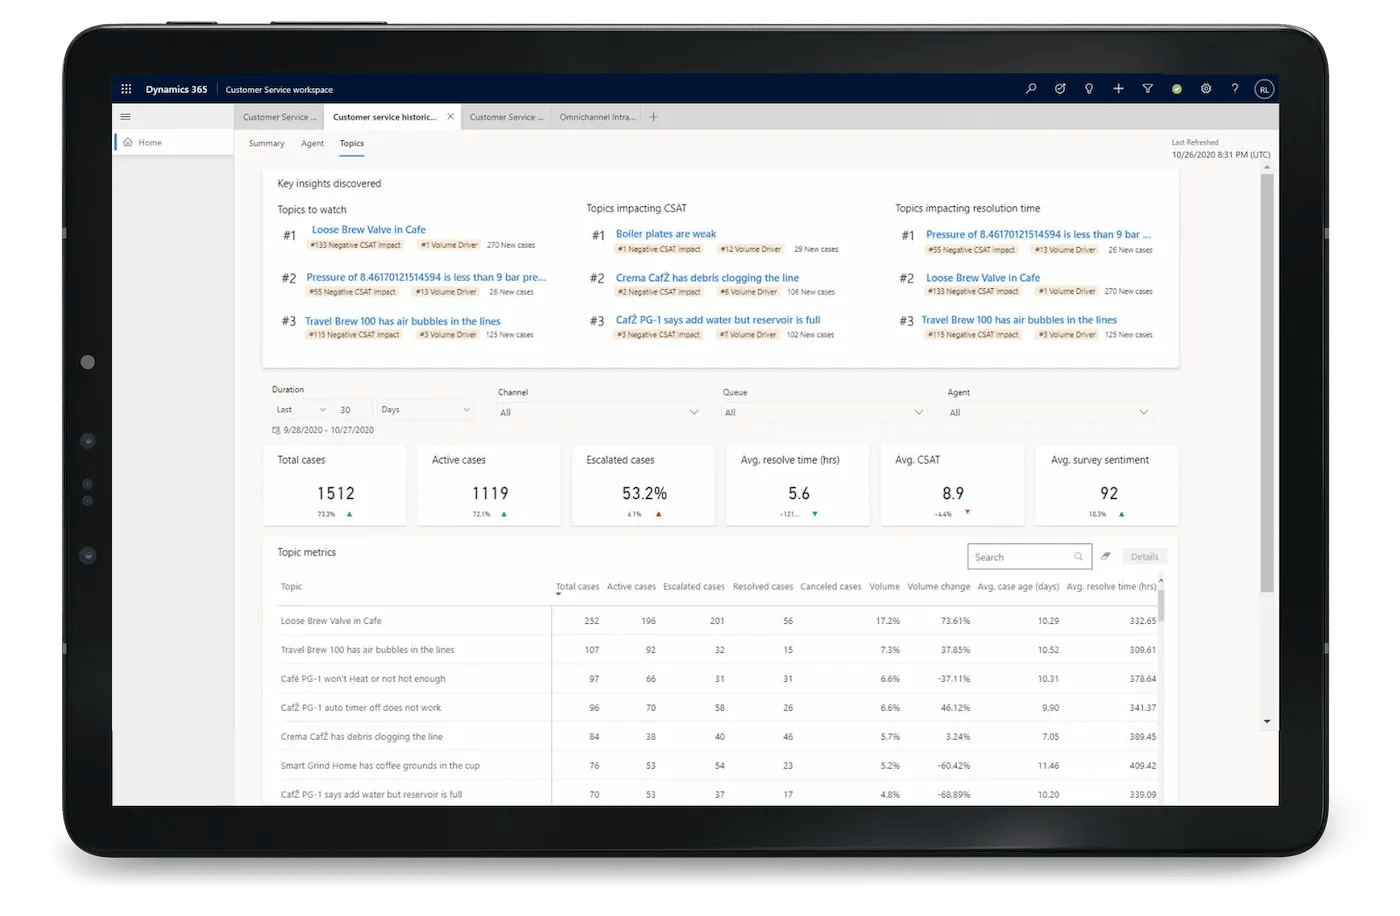 Track performance and get actionable insights with Dynamics 365 Customer Service